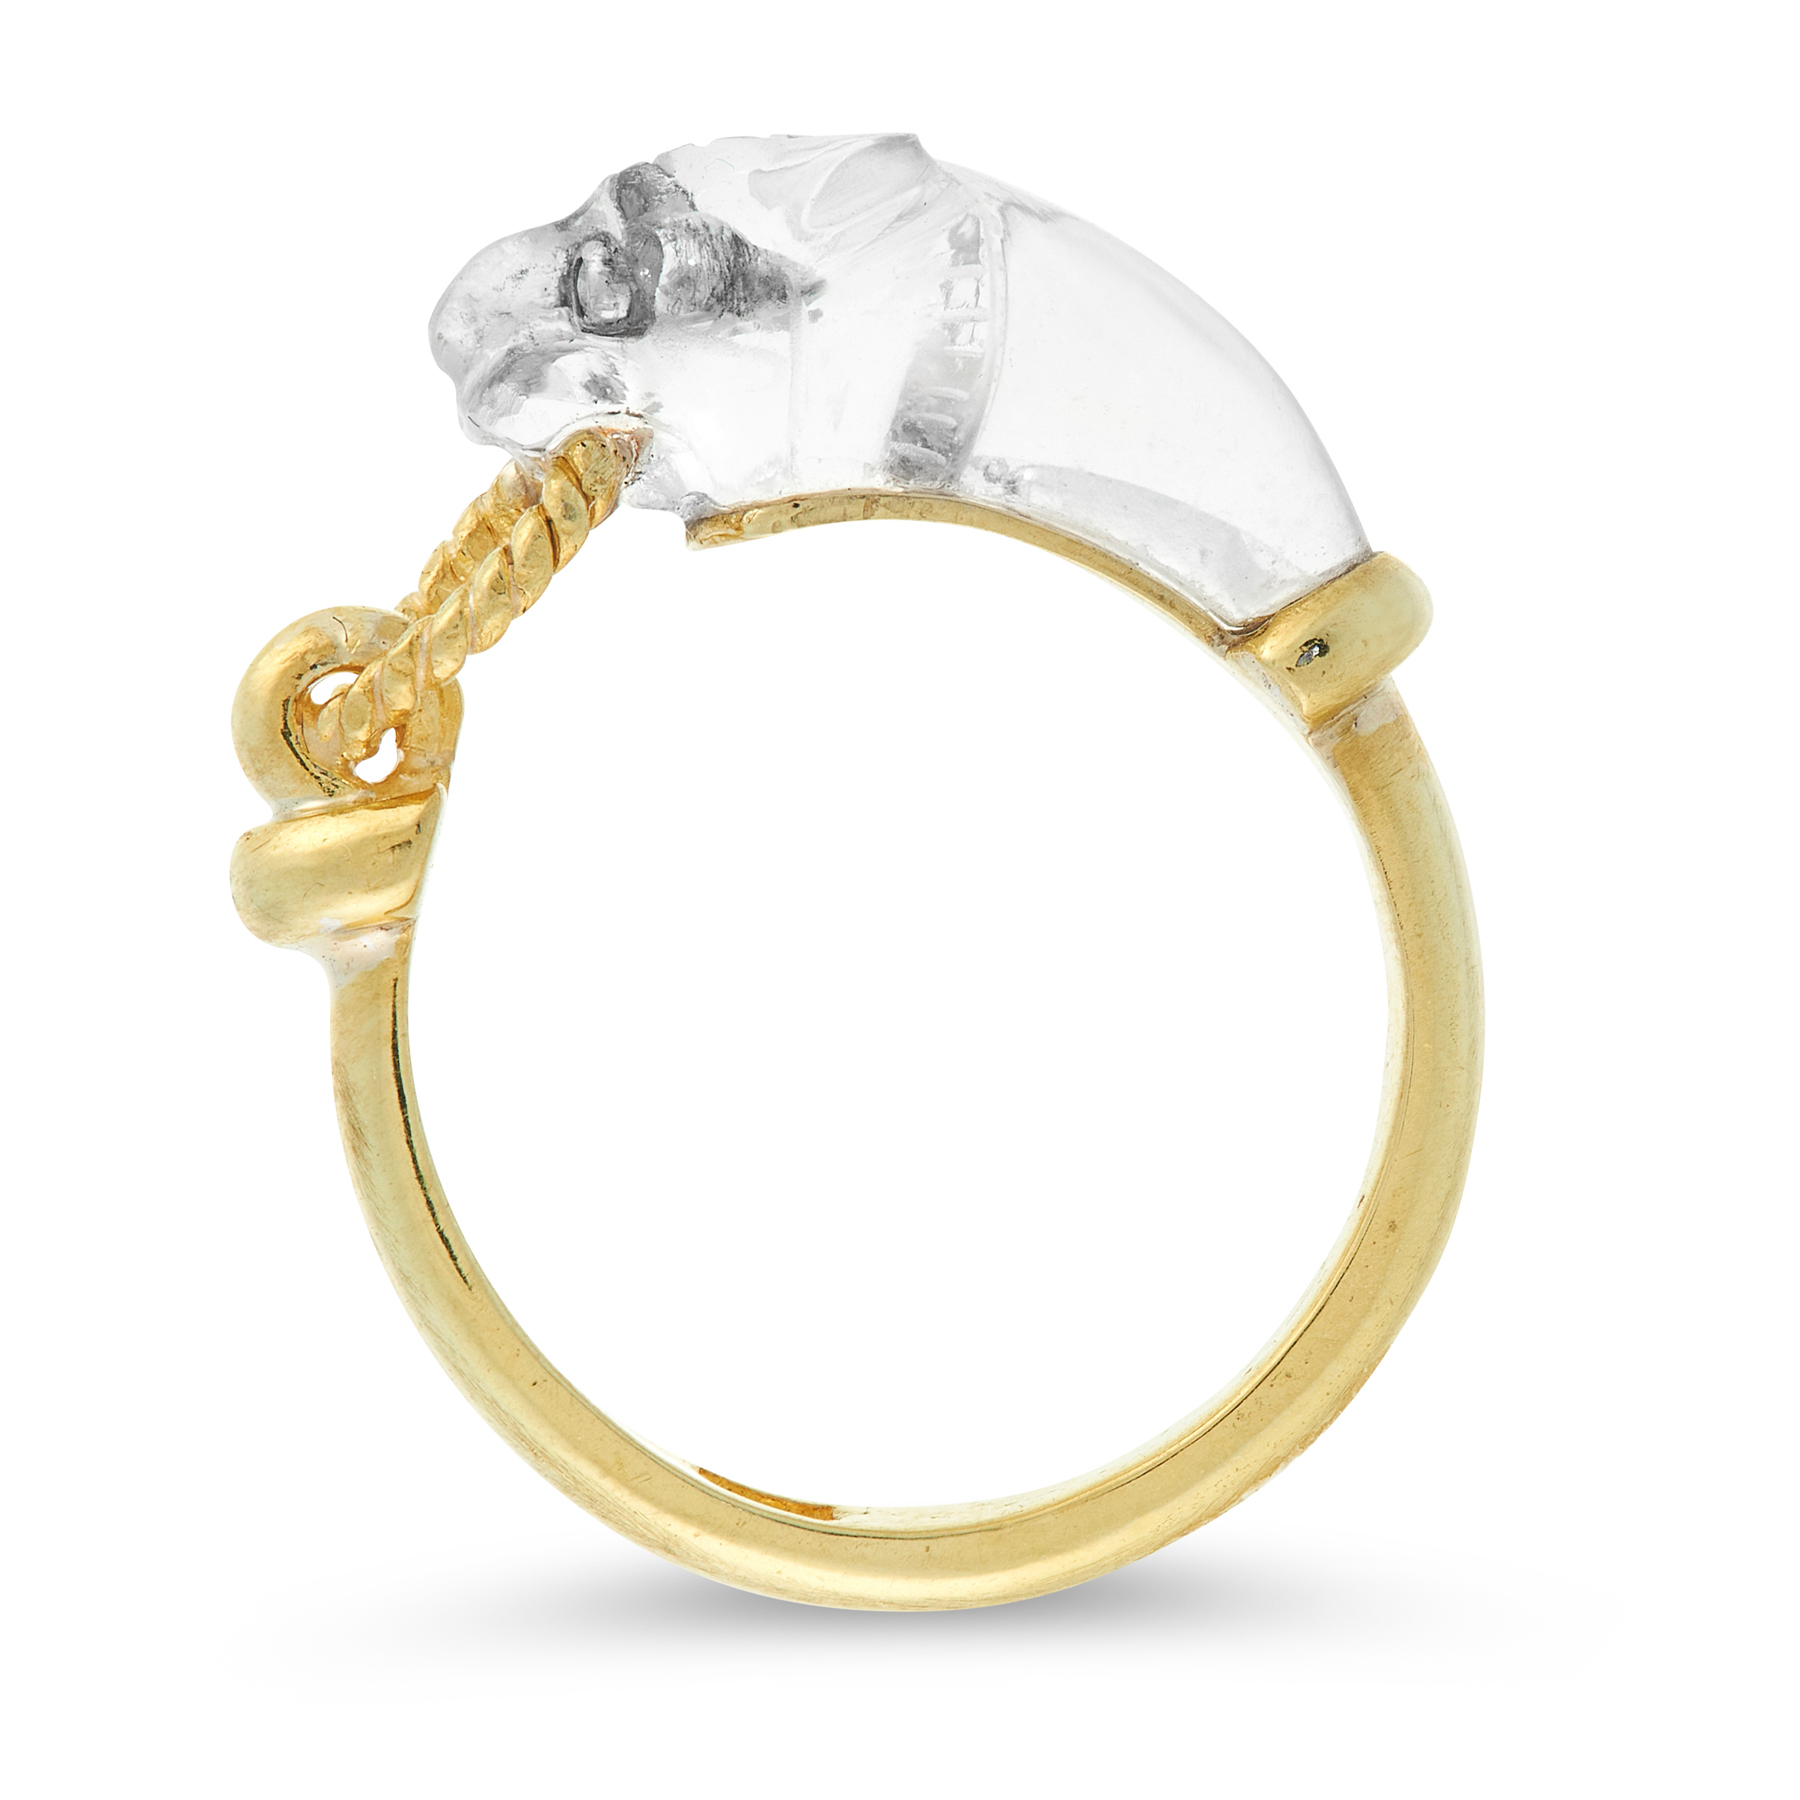 A VINTAGE ROCK CRYSTAL AND DIAMOND PANTHER RING in 18ct yellow gold, designed as the head of a - Image 3 of 4